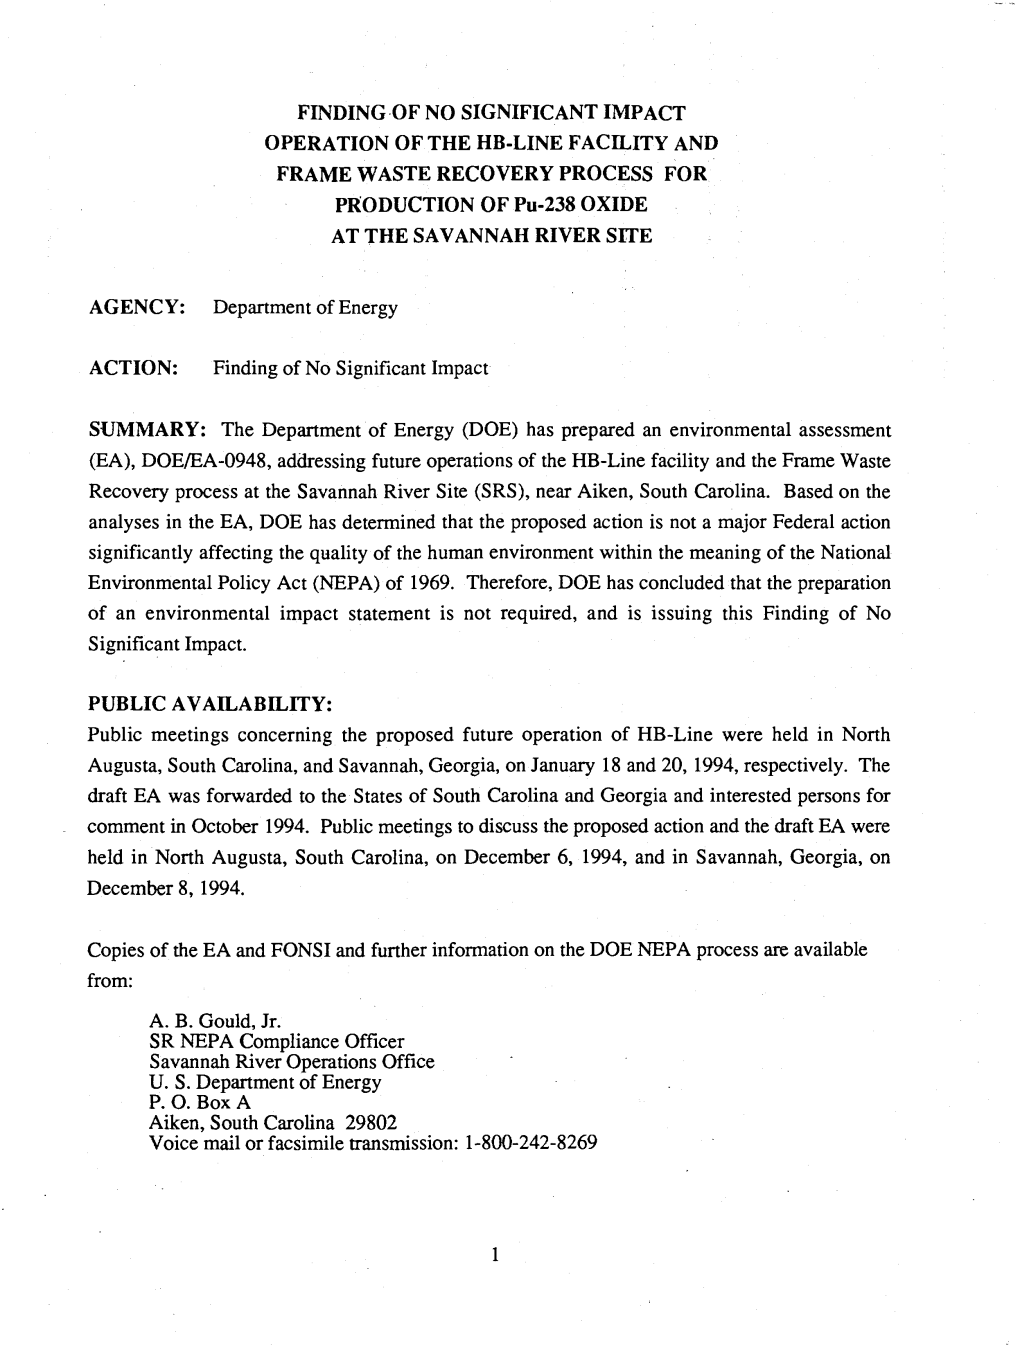 FINDING of NO SIGNIFICANT IMPACT OPERATION of the HB-LINE FACILITY and FRAME WASTE RECOVERY PROCESS for PRODUCTION of Pu-238 OXIDE at the SAVANNAH RIVER SITE